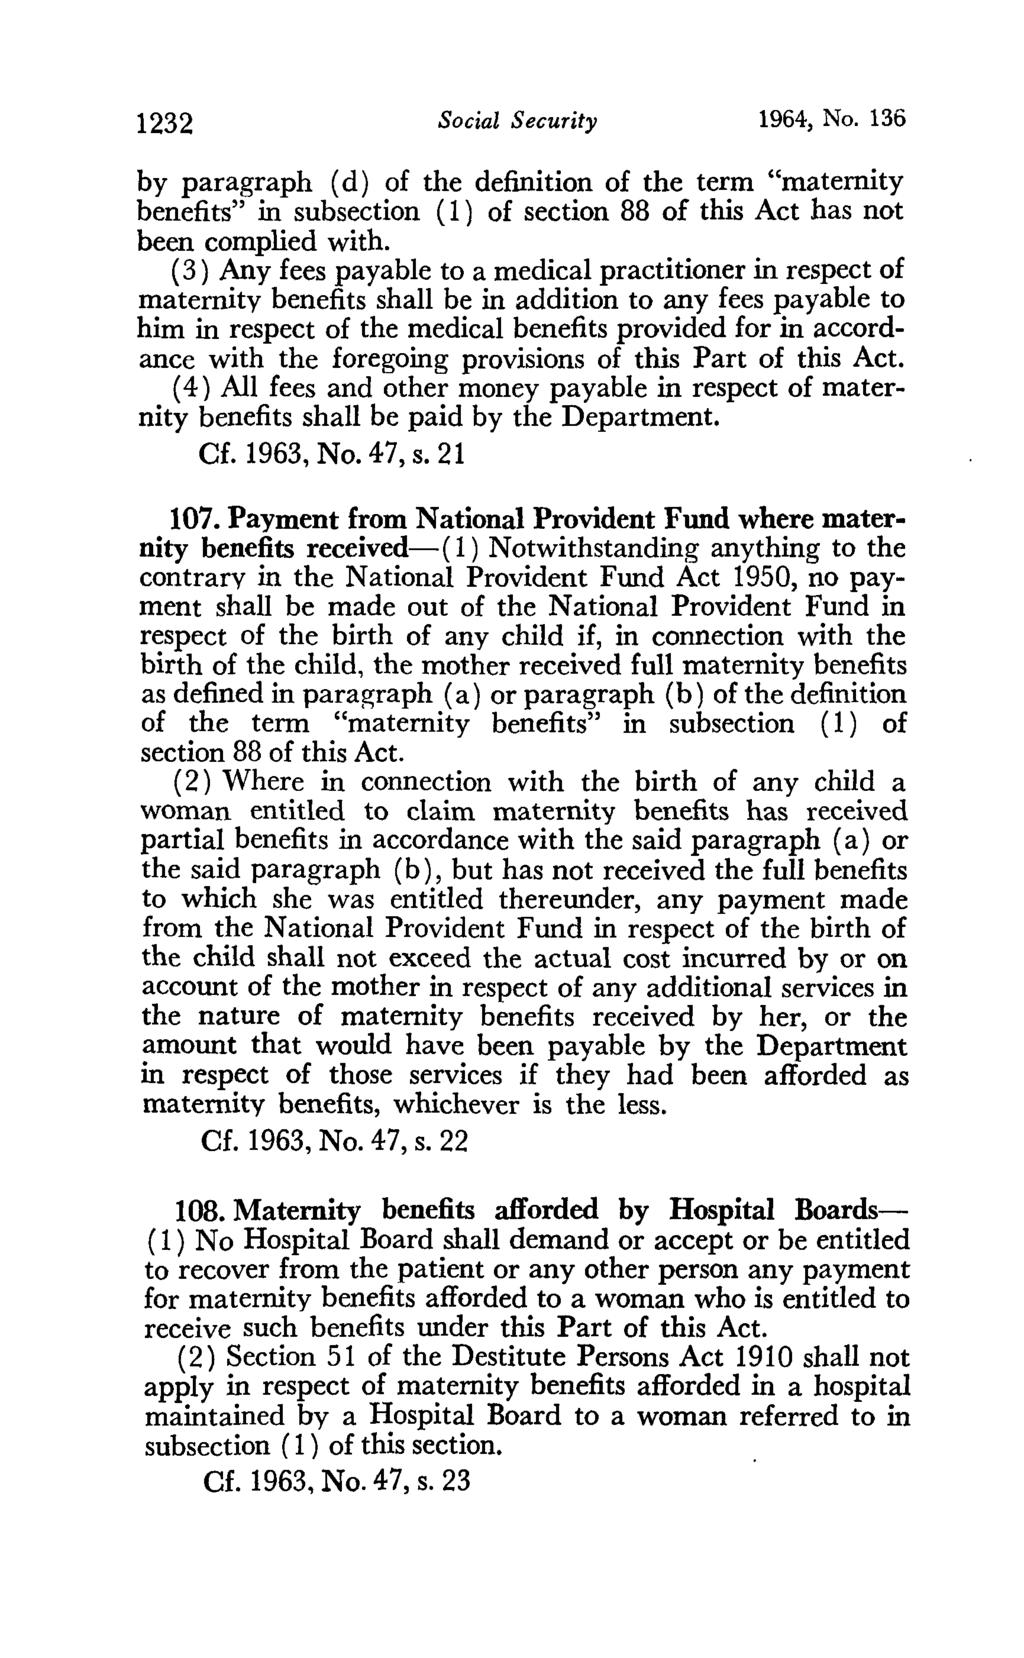 1232 Social Security 1964, No. 136 by paragraph (d) of the definition of the term "maternity benefits" in subsection (1) of section 88 of this Act has not been complied with.